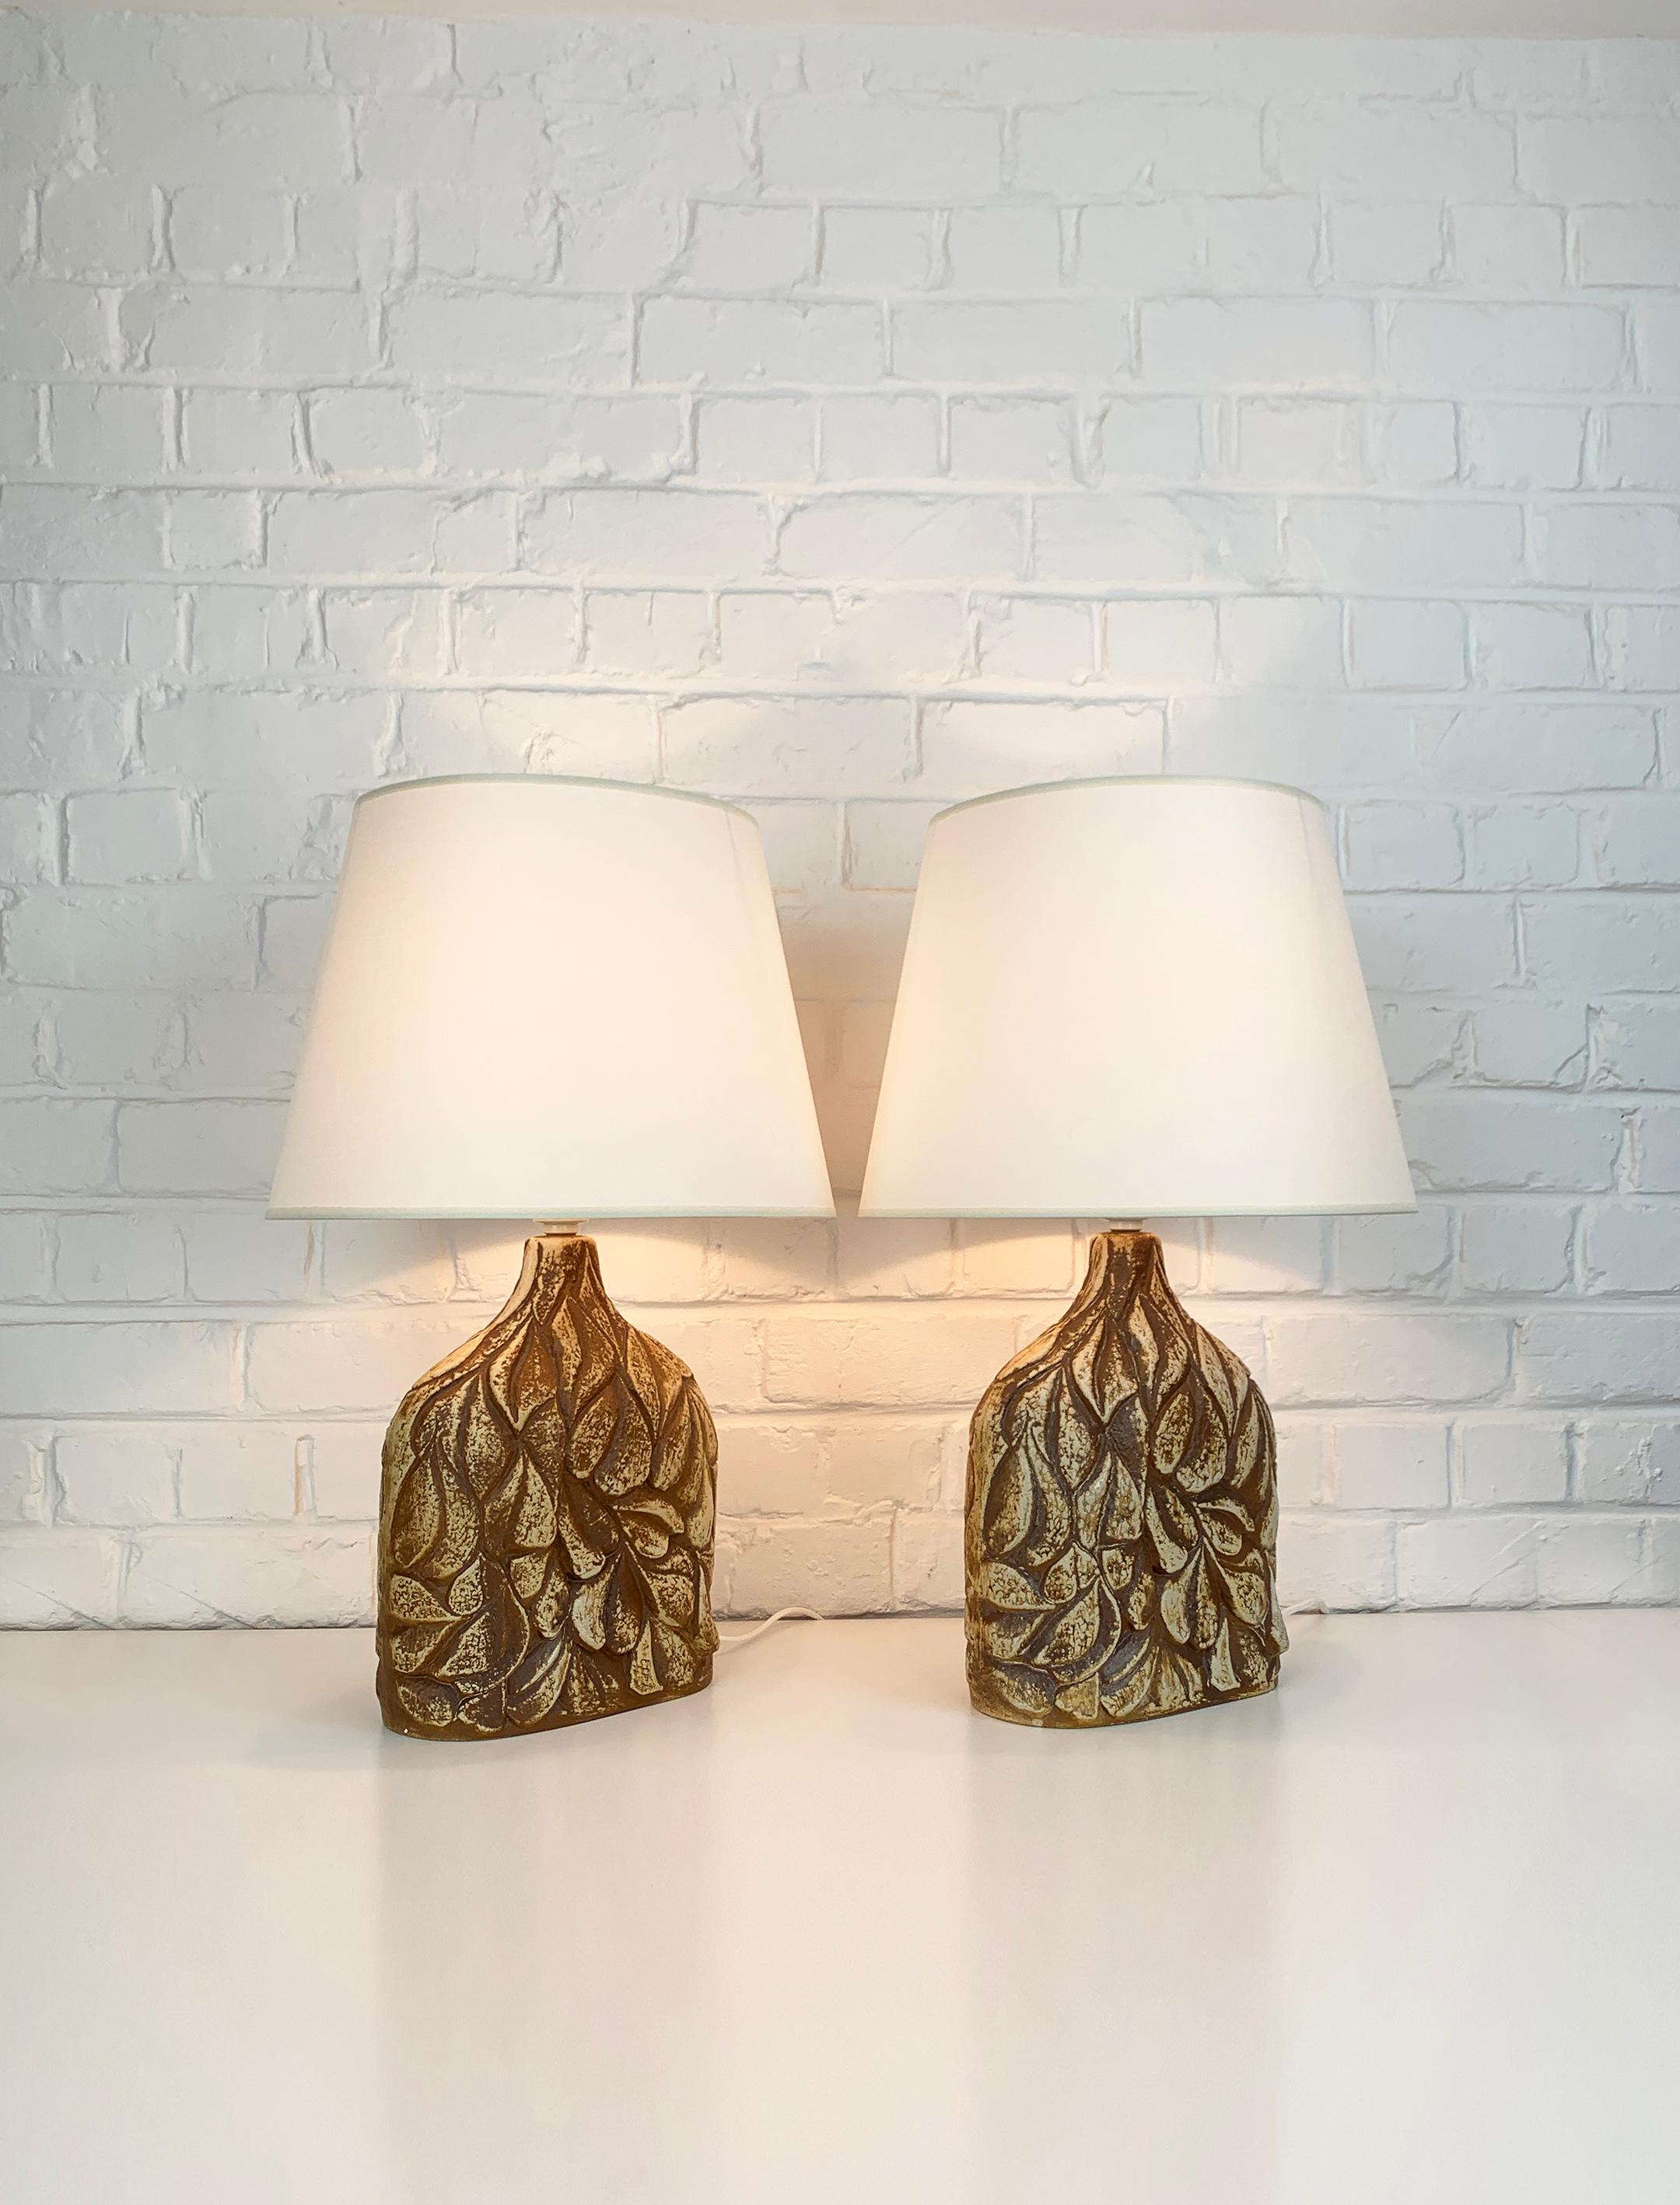 Pair of Danish Mid-Century stoneware table lamps of the 1970s, design by Haico Nitzsche. Sculptural lamp in earthy colored glazed stoneware. 

Haico Nitzsche trained in ceramics in Germany before teaching at the National Institute of Design in